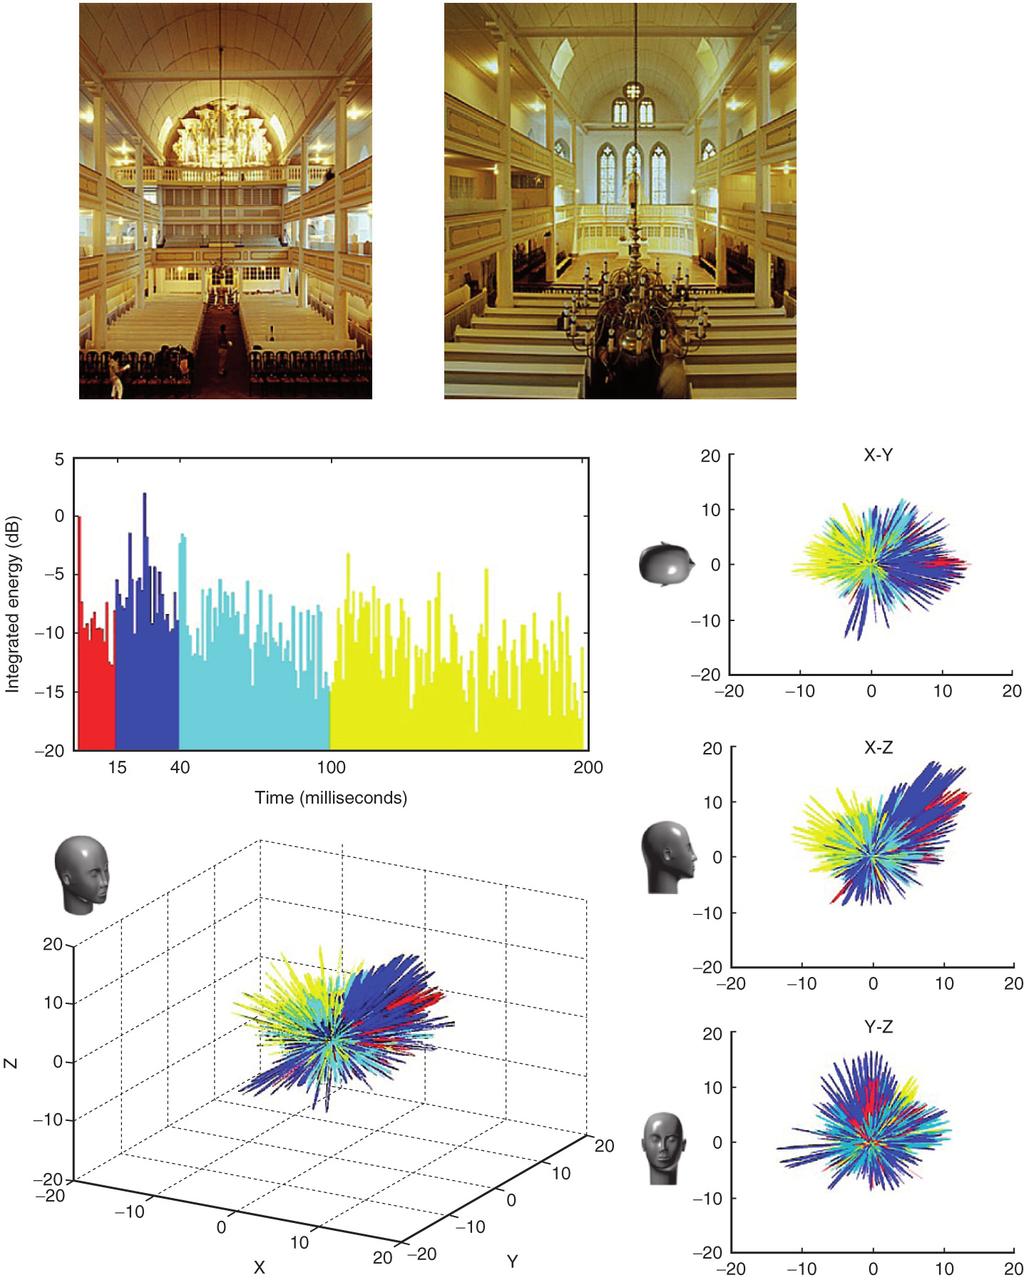 344 New Acoustical Parameters and Visualization Techniques to Analyze the Spatial Distribution of Sound in Music Spaces For this measurement, the loudspeaker was located in front of the organ façade.